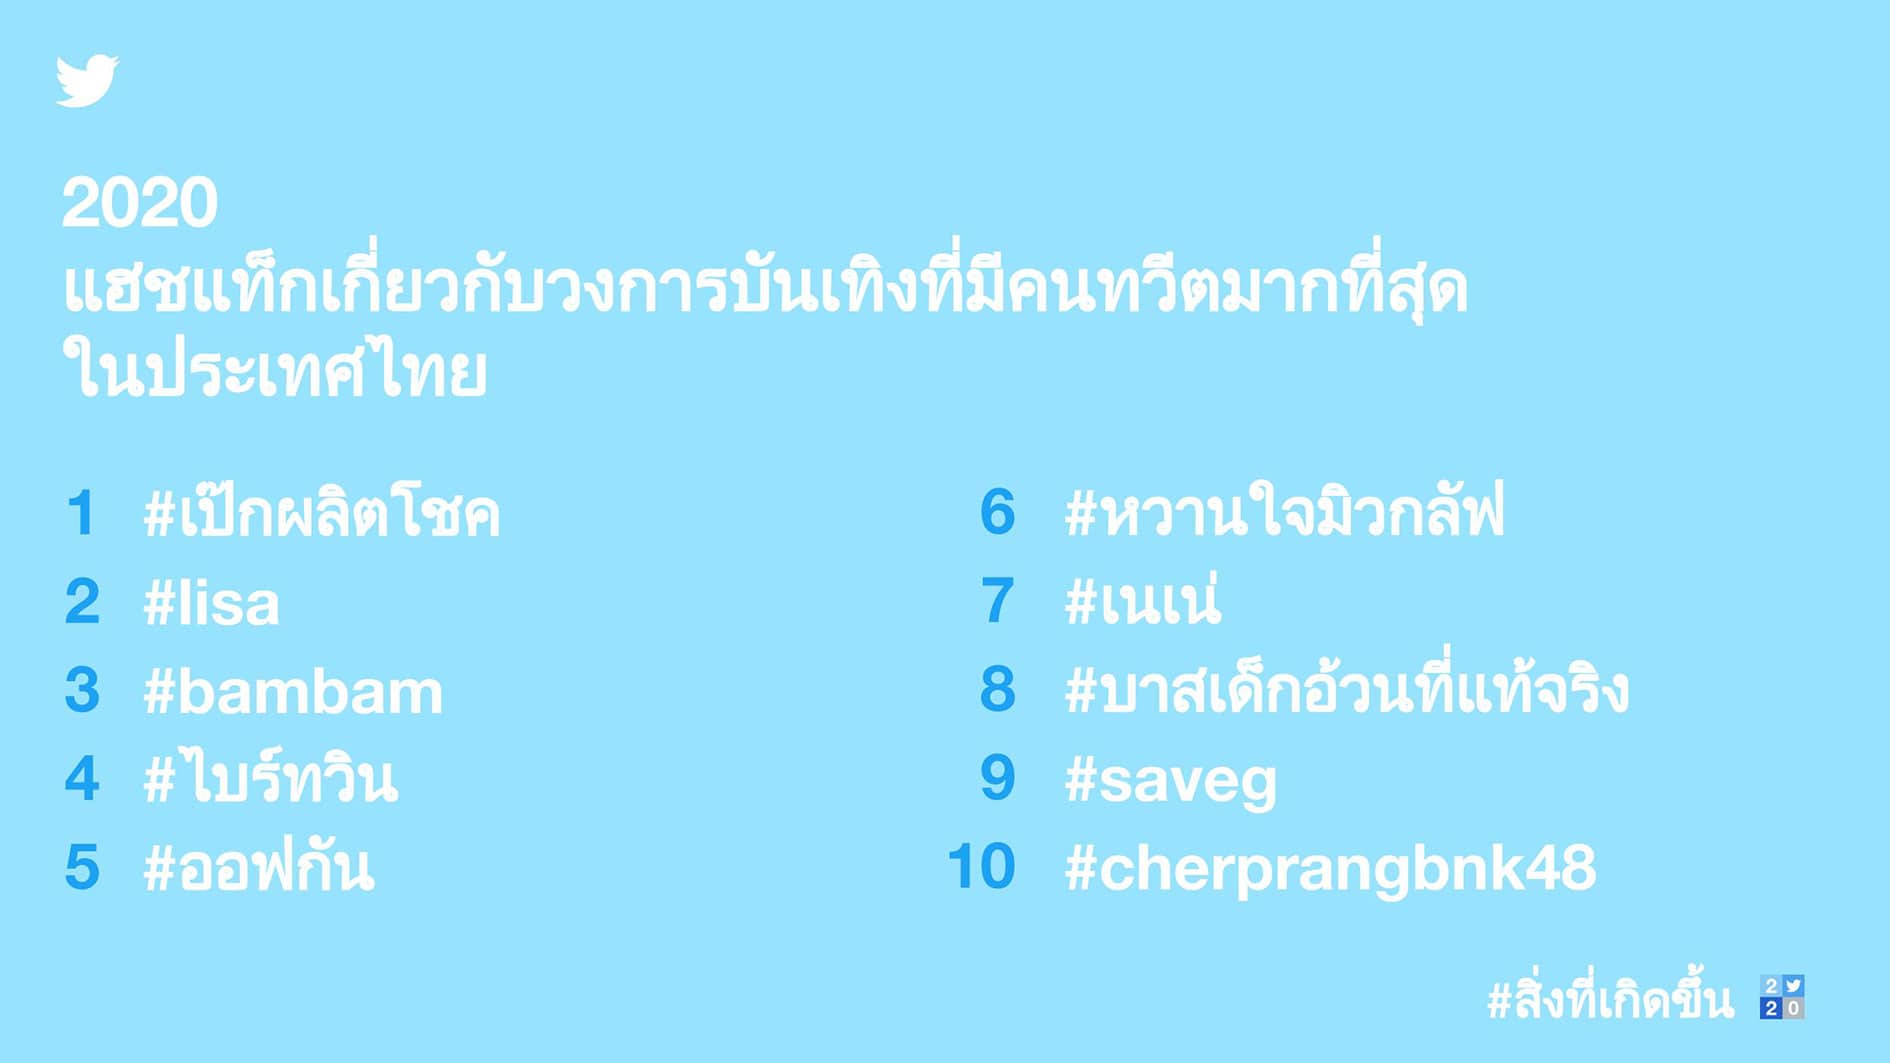 - Most Tweeted about entertainment hashtags in Thailand THA m - ภาพที่ 9